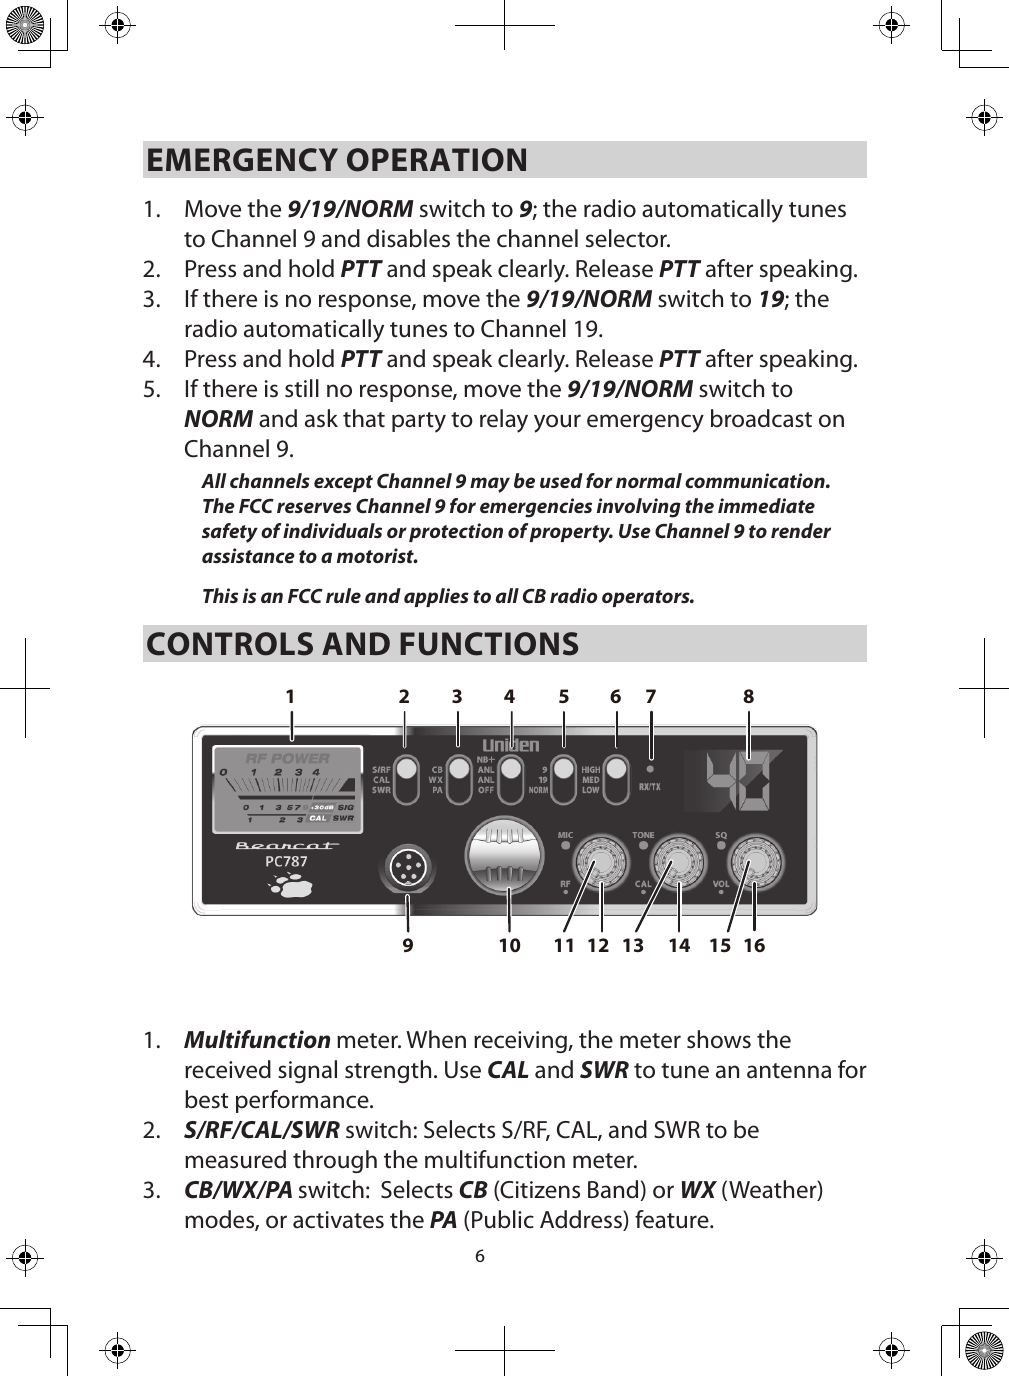 6EMERGENCY OPERATION 1.  Move the 9/19/NORM switch to 9; the radio automatically tunes to Channel 9 and disables the channel selector. 2.  Press and hold PTT and speak clearly. Release PTT after speaking.3.  If there is no response, move the 9/19/NORM switch to 19; the radio automatically tunes to Channel 19.4.  Press and hold PTT and speak clearly. Release PTT after speaking.5.  If there is still no response, move the 9/19/NORM switch to NORM and ask that party to relay your emergency broadcast on Channel 9. All channels except Channel 9 may be used for normal communication. The FCC reserves Channel 9 for emergencies involving the immediate safety of individuals or protection of property. Use Channel 9 to render assistance to a motorist.This is an FCC rule and applies to all CB radio operators. CONTROLS AND FUNCTIONS2161412109876543111 15131.  Multifunction meter. When receiving, the meter shows the received signal strength. Use CAL and SWR to tune an antenna for best performance.2.  S/RF/CAL/SWR switch: Selects S/RF, CAL, and SWR to be measured through the multifunction meter.3.  CB/WX/PA switch:  Selects CB (Citizens Band) or WX (Weather) modes, or activates the PA (Public Address) feature.